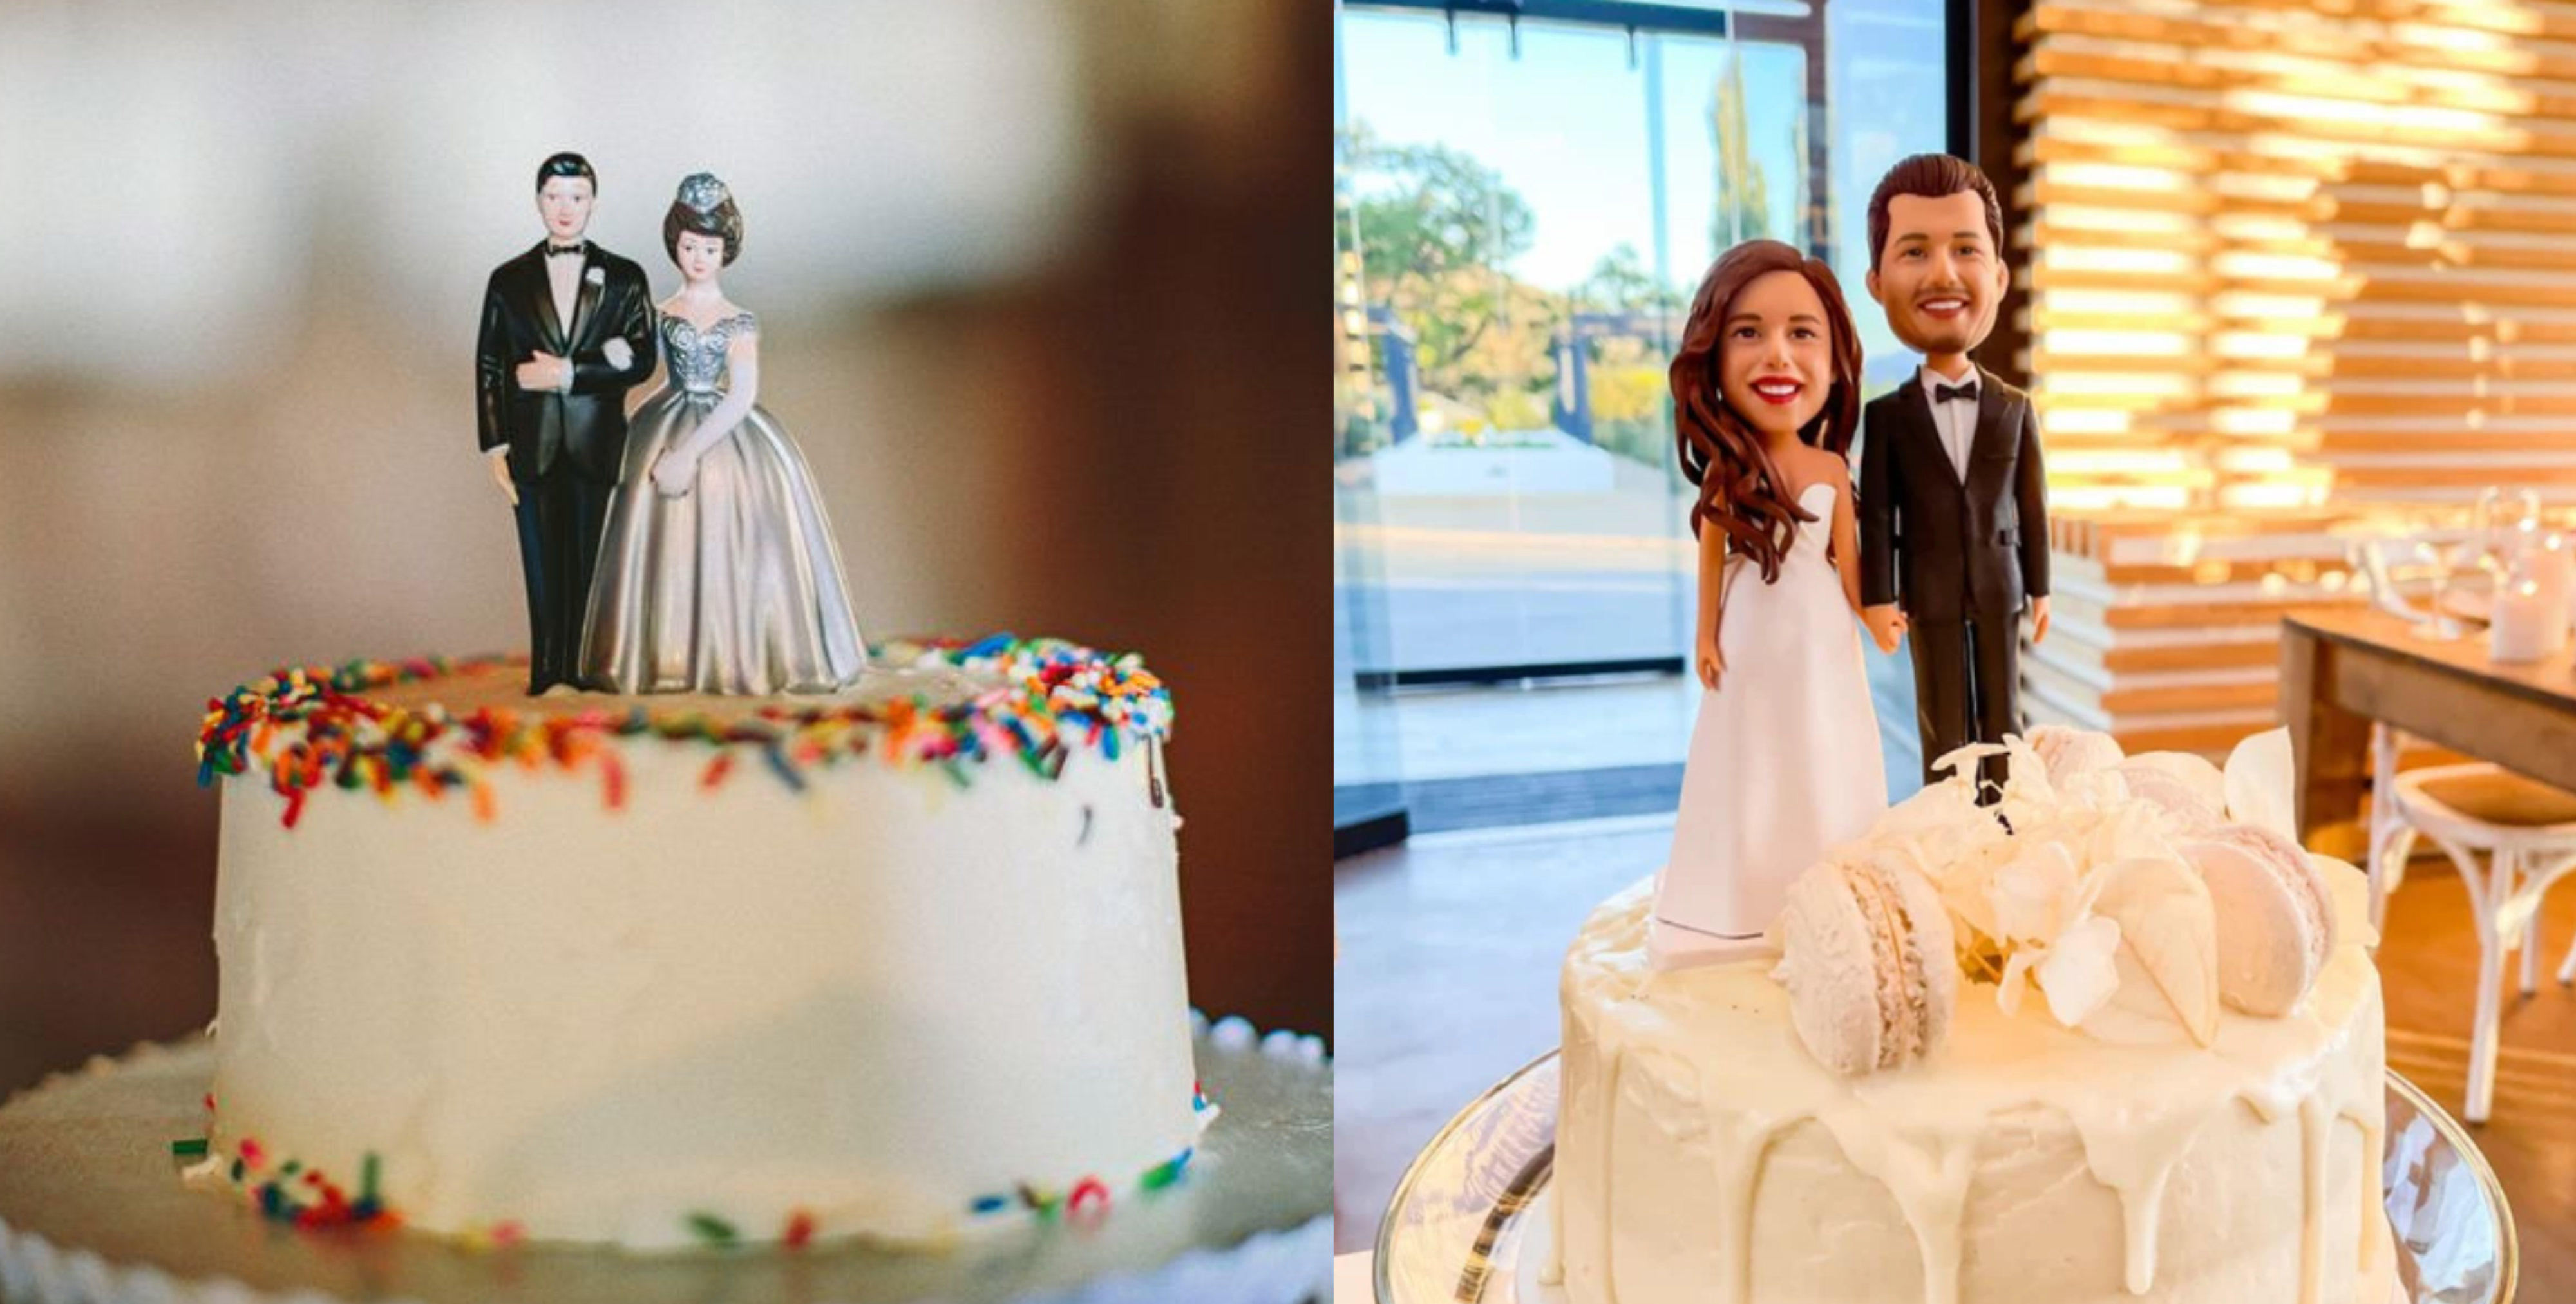 Oldest to Newest Variations of Cake Toppers in Wedding